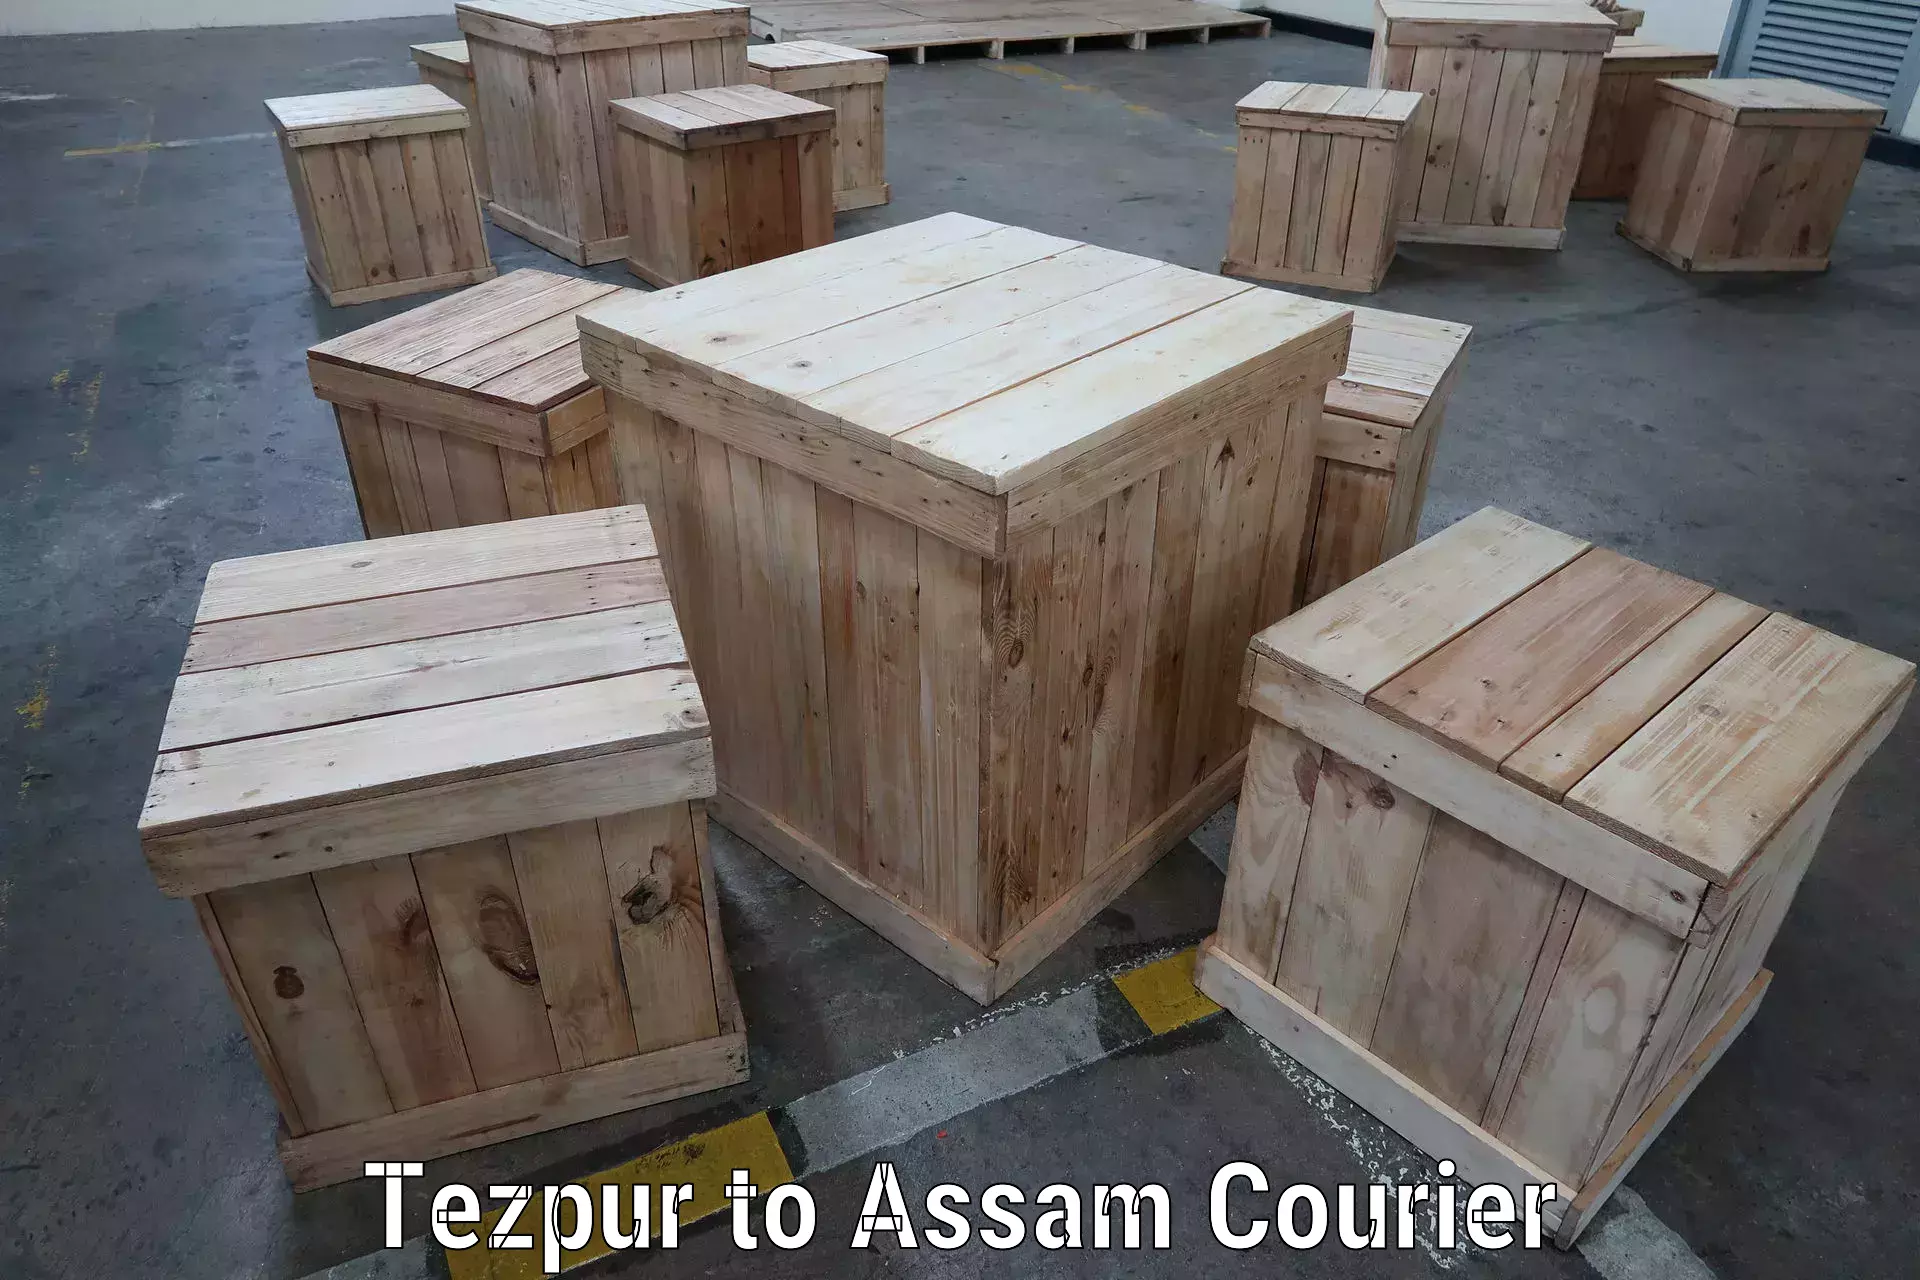 Express delivery capabilities Tezpur to Tezpur University